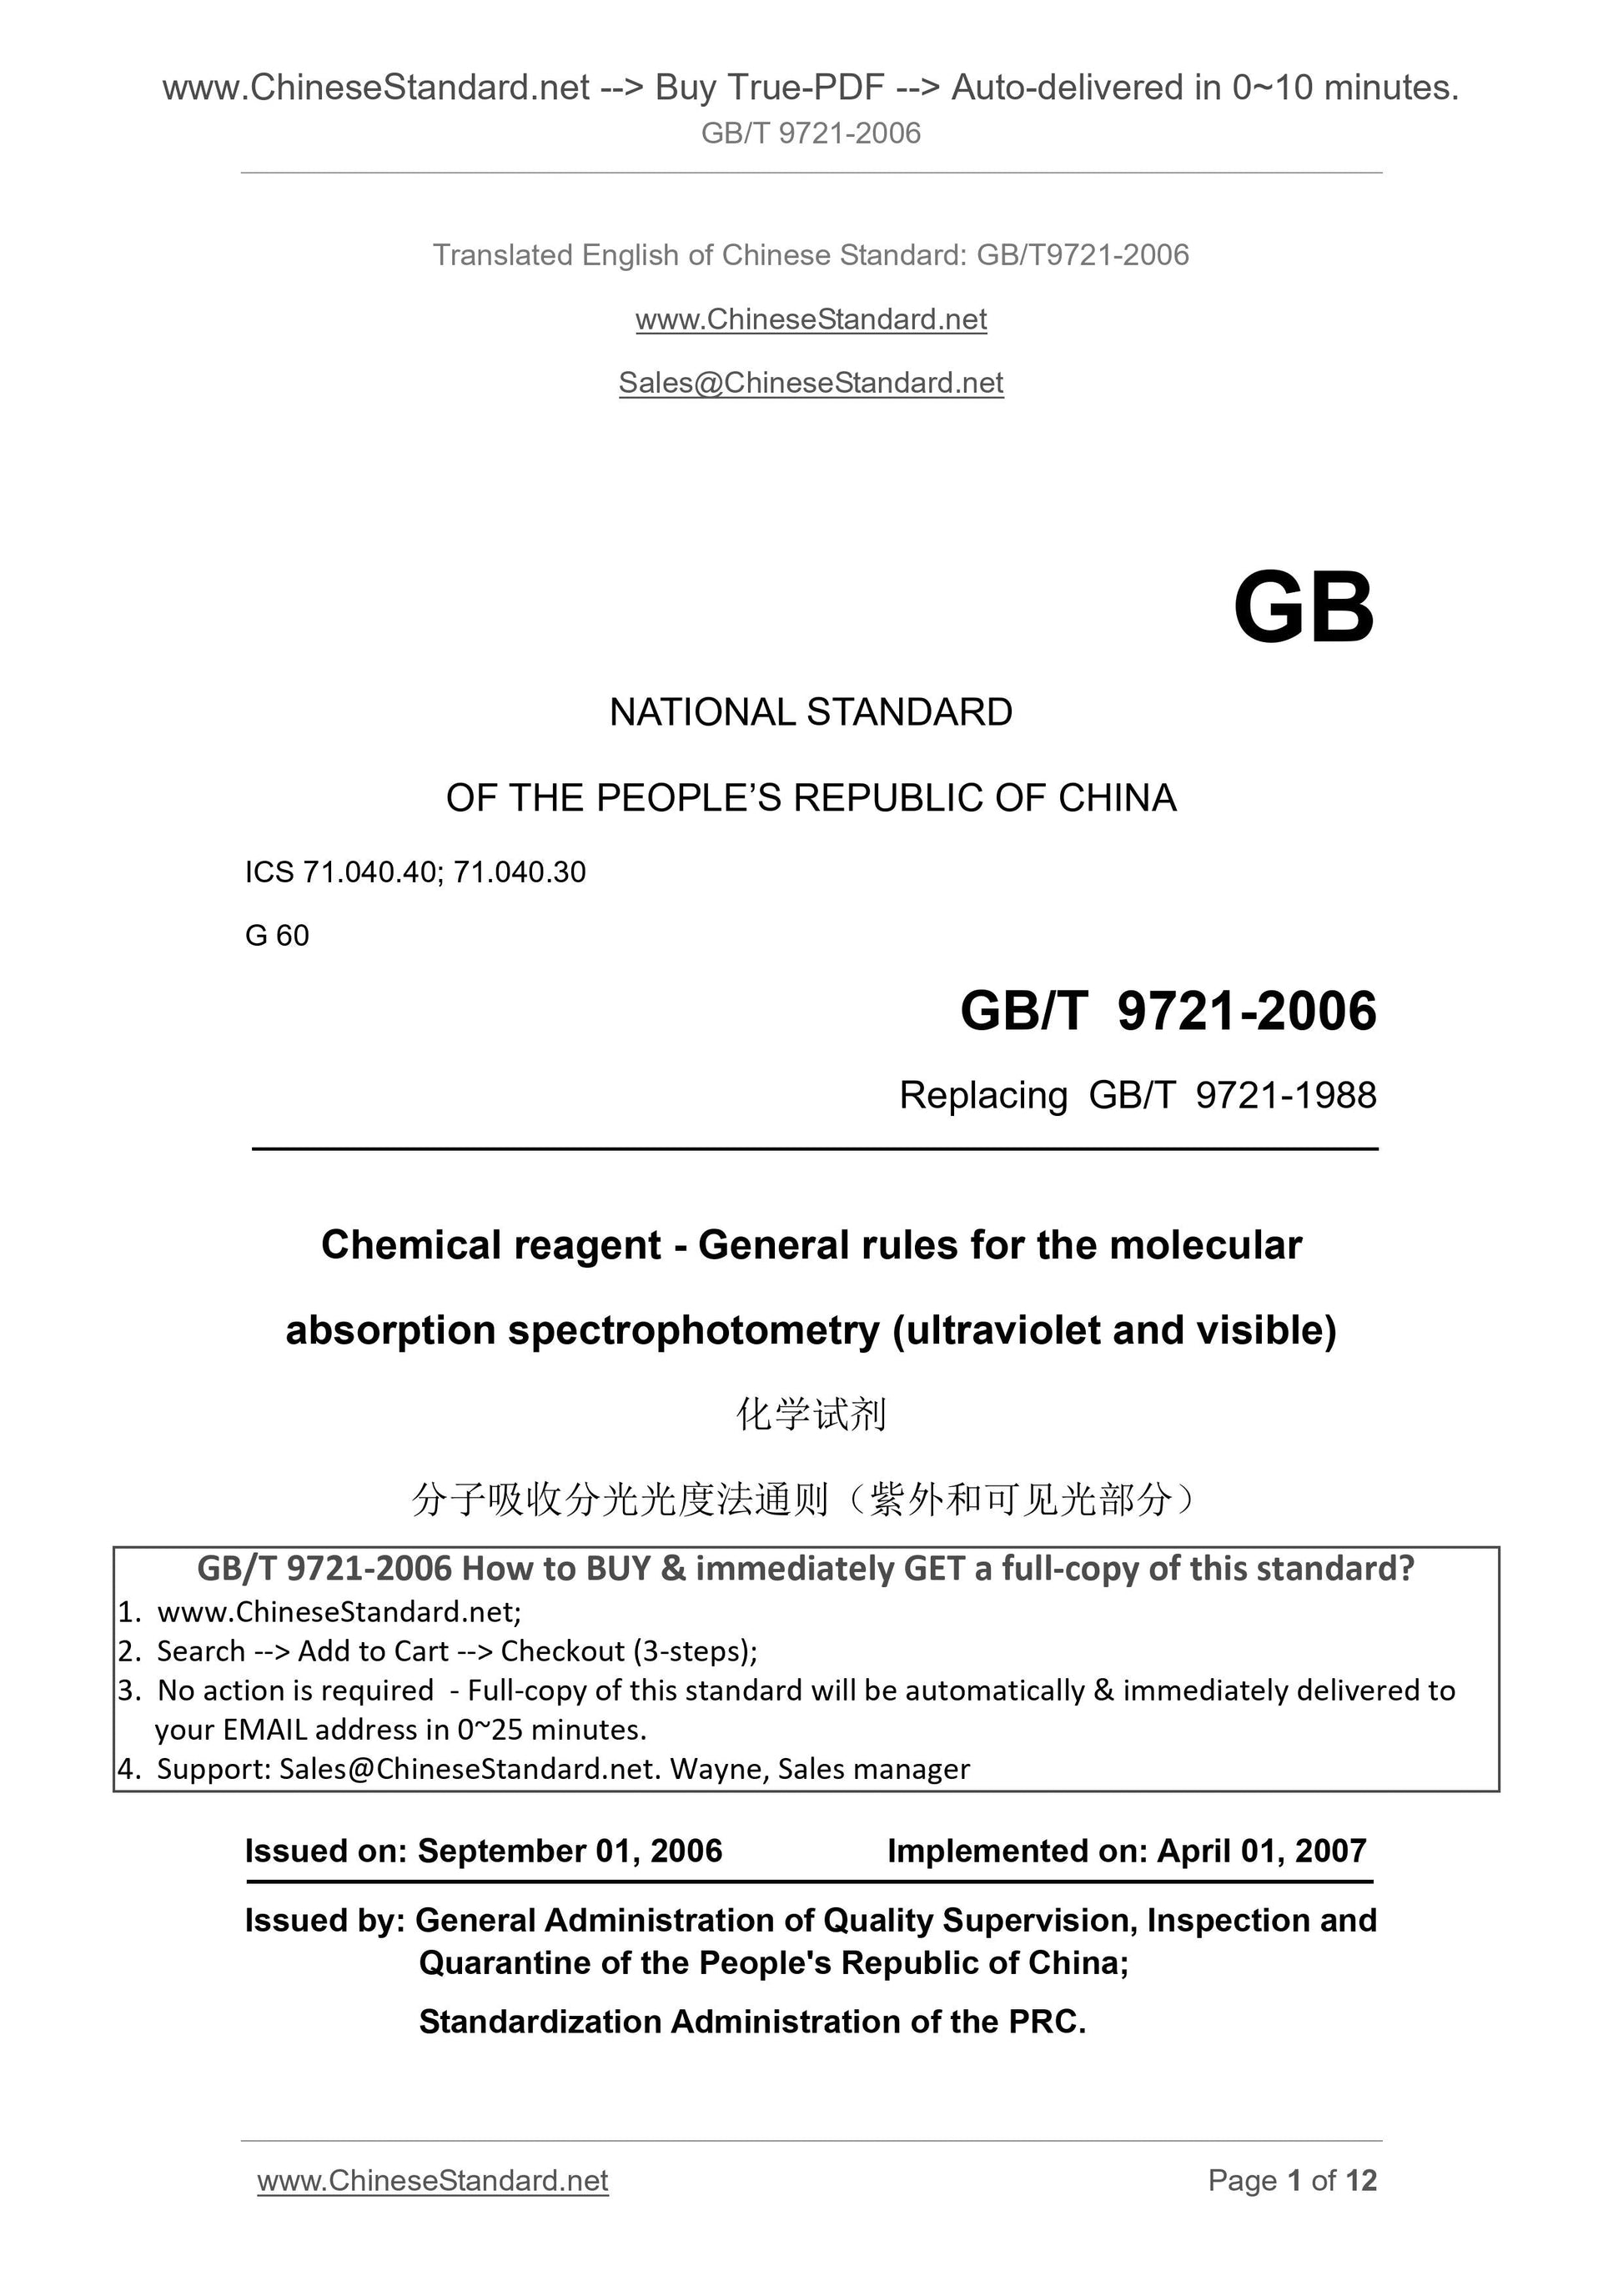 GB/T 9721-2006 Page 1